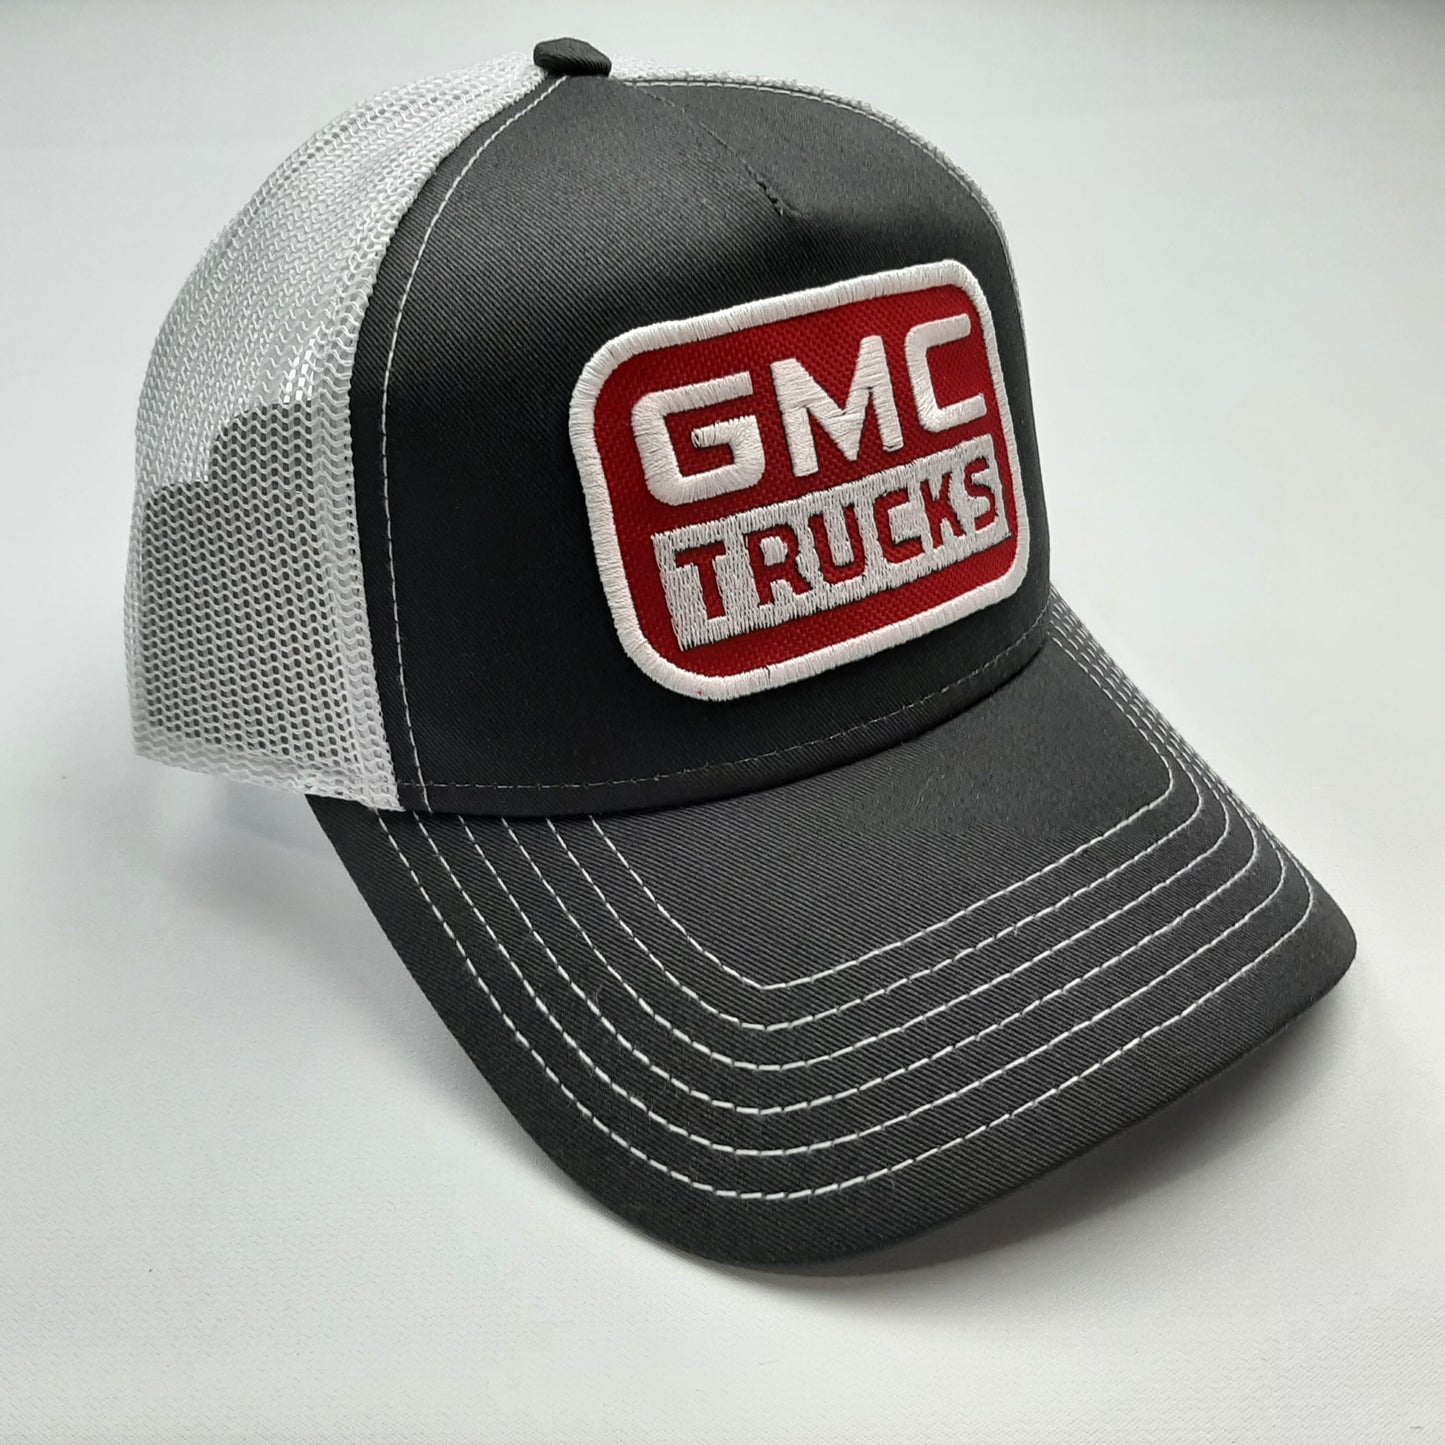 GMC Trucks Embroidered Patch Curved Bill Snapback Mesh Hat Cap White & Gray Otto